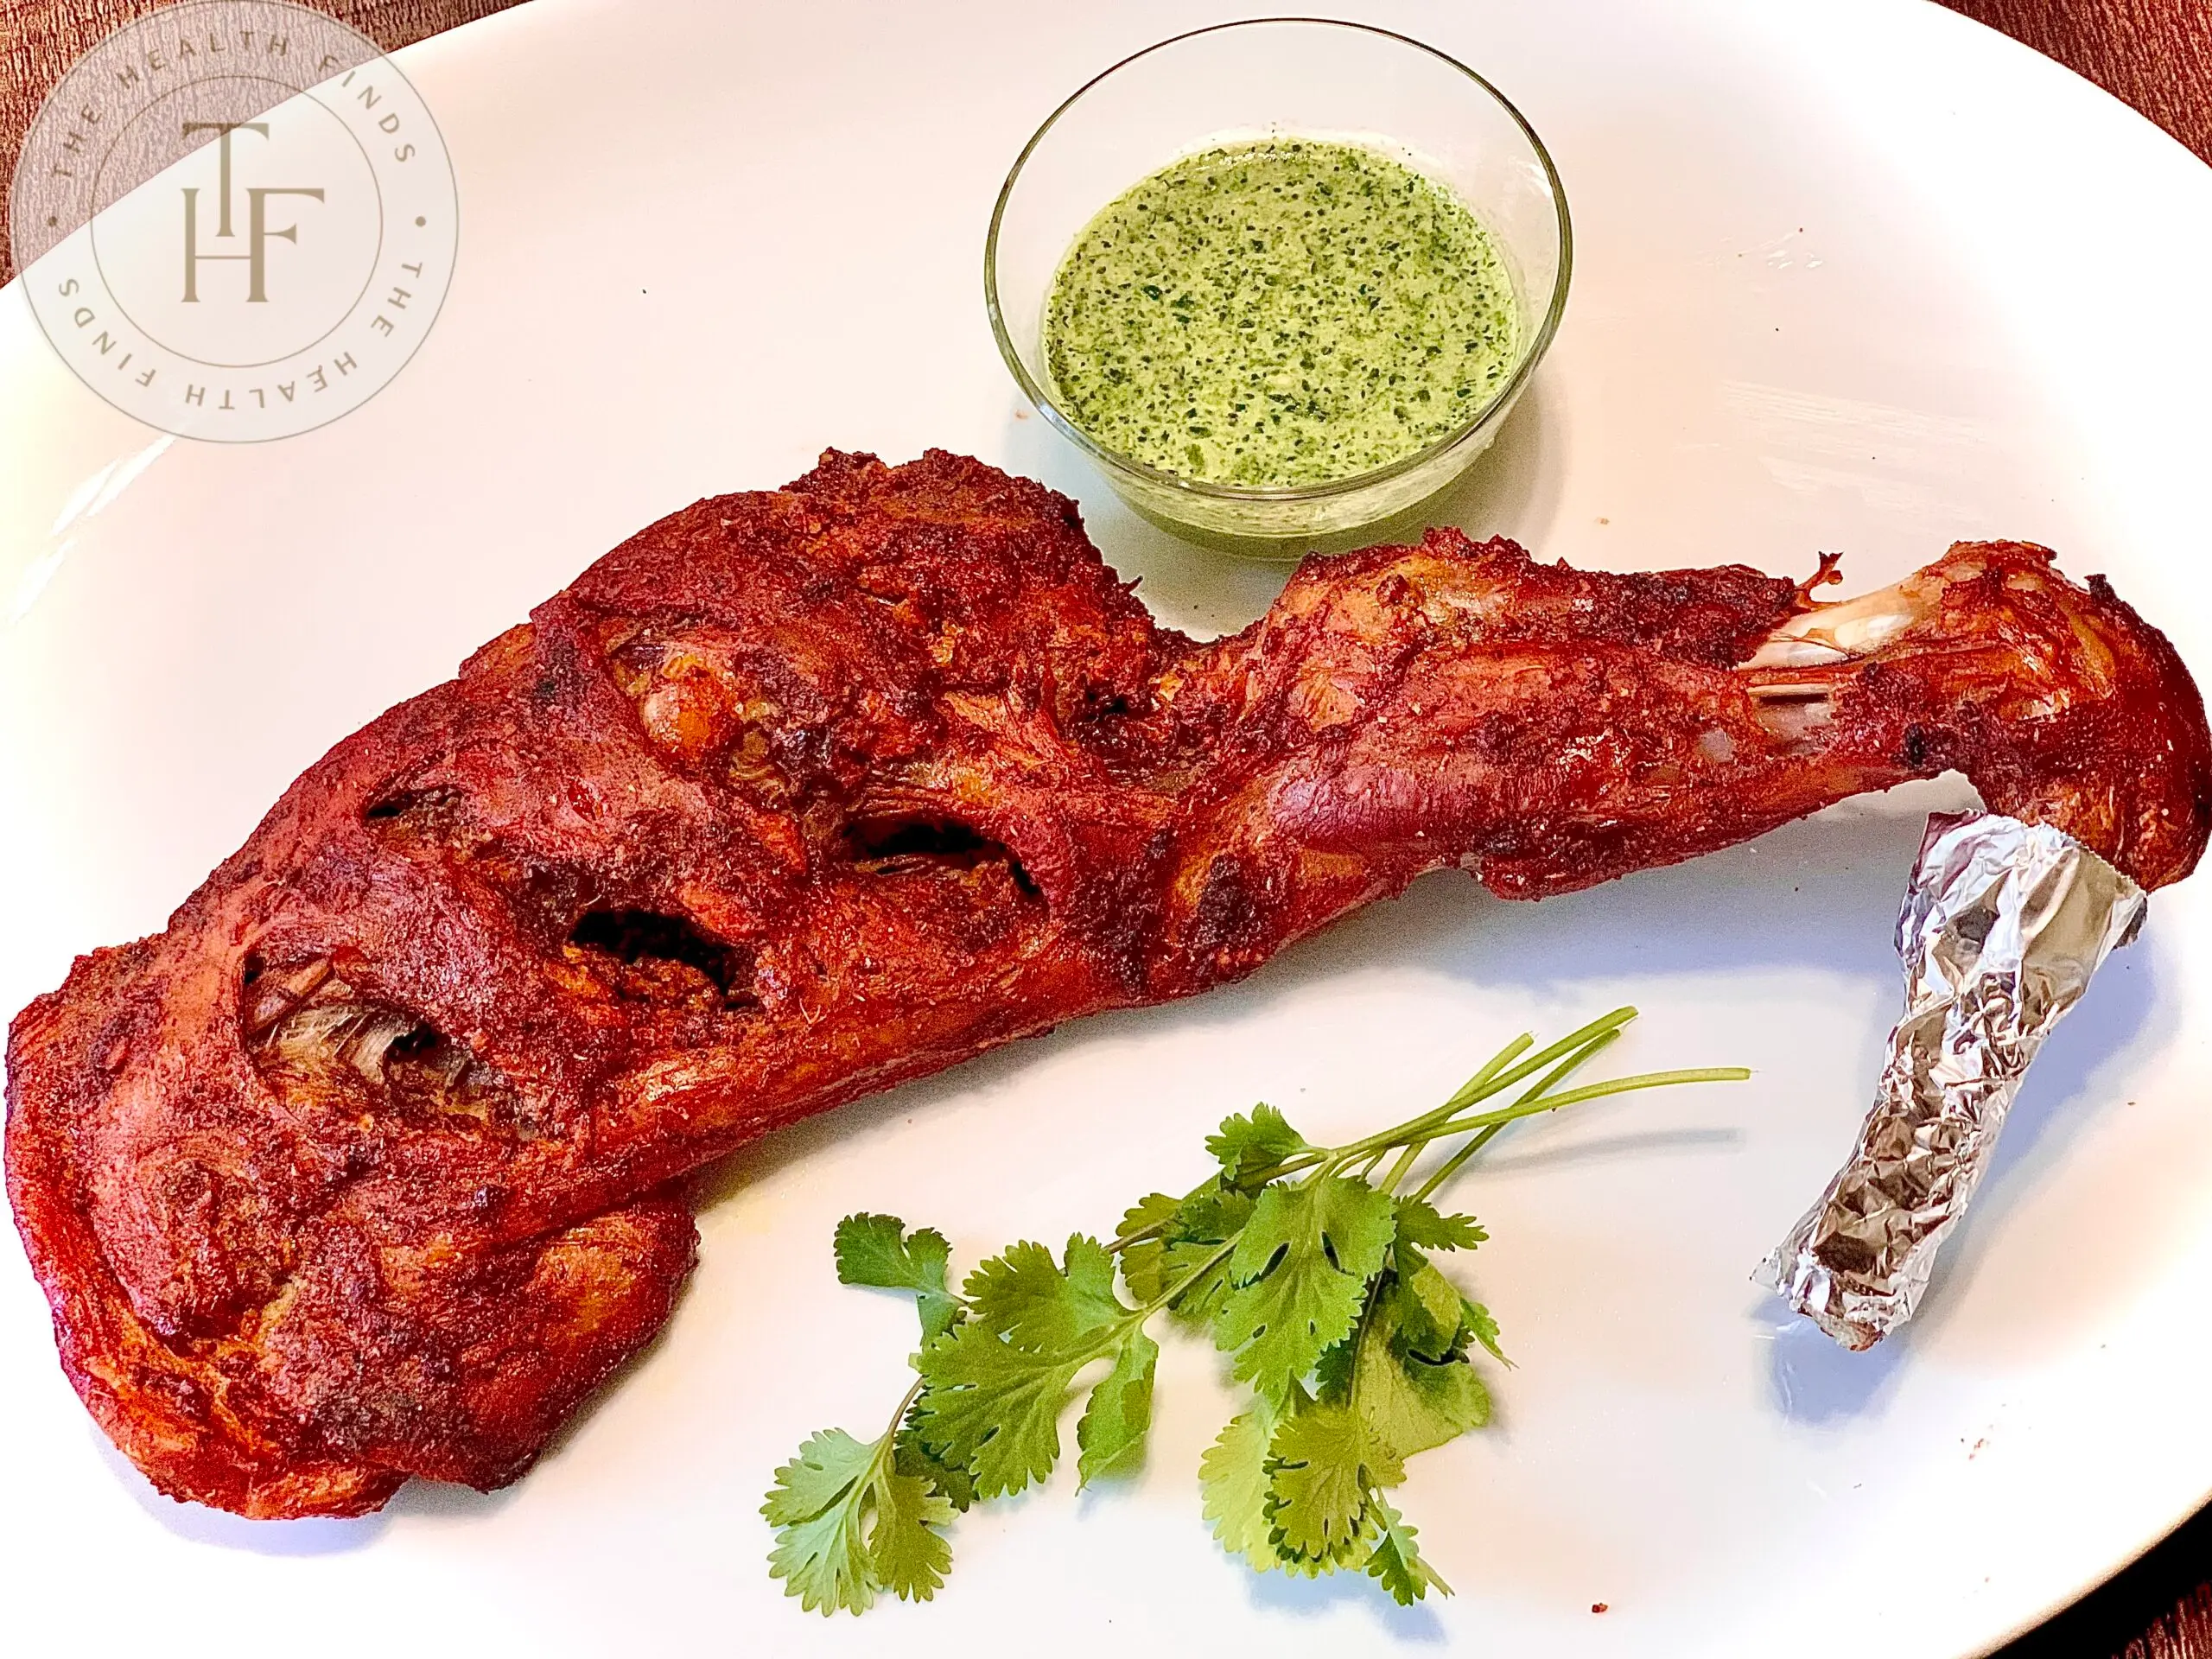 Baked goat leg with green dip and cilantro leaves